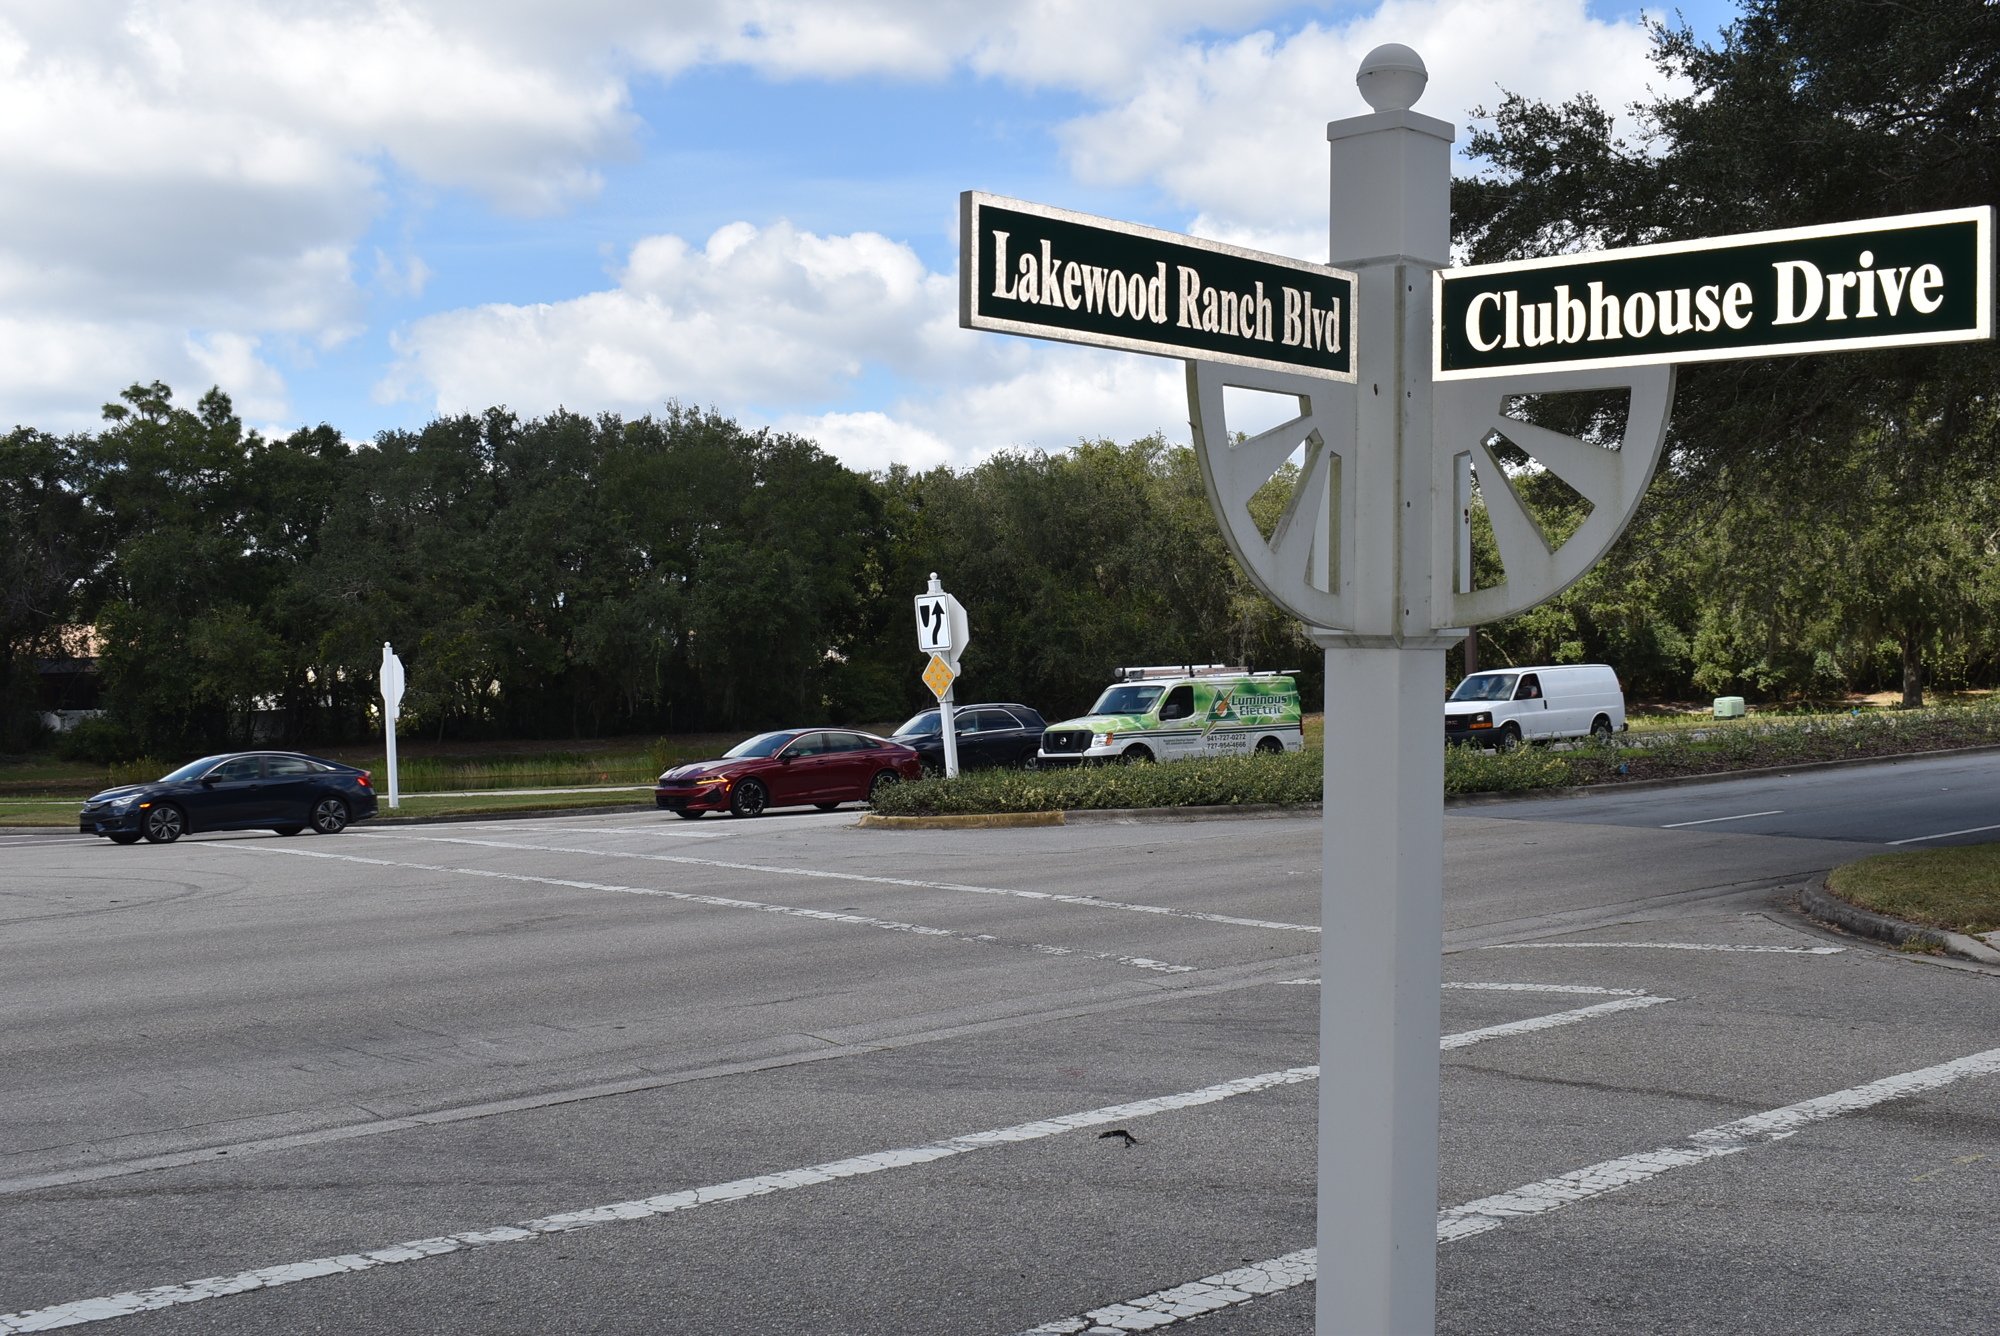 This four-way stop at the intersection of Lakewood Ranch Boulevard and Clubhouse Drive will be replaced by a traffic light later this year.